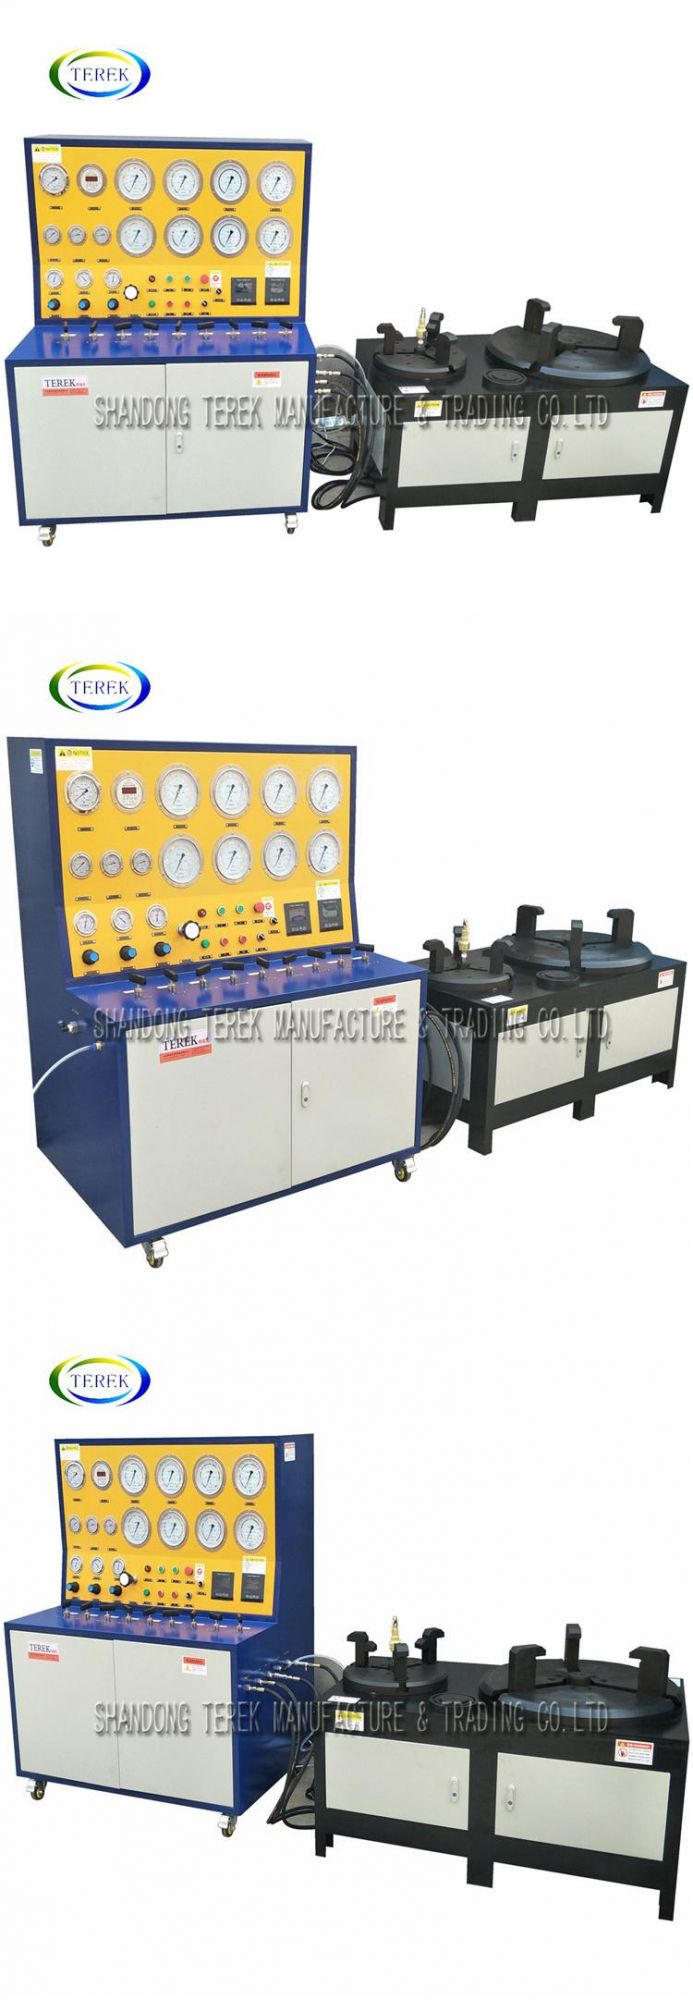 Tvt-40-Dn400 Manual Control Pneumatic Safety Relief Valve Test Equipment for Pressure Test